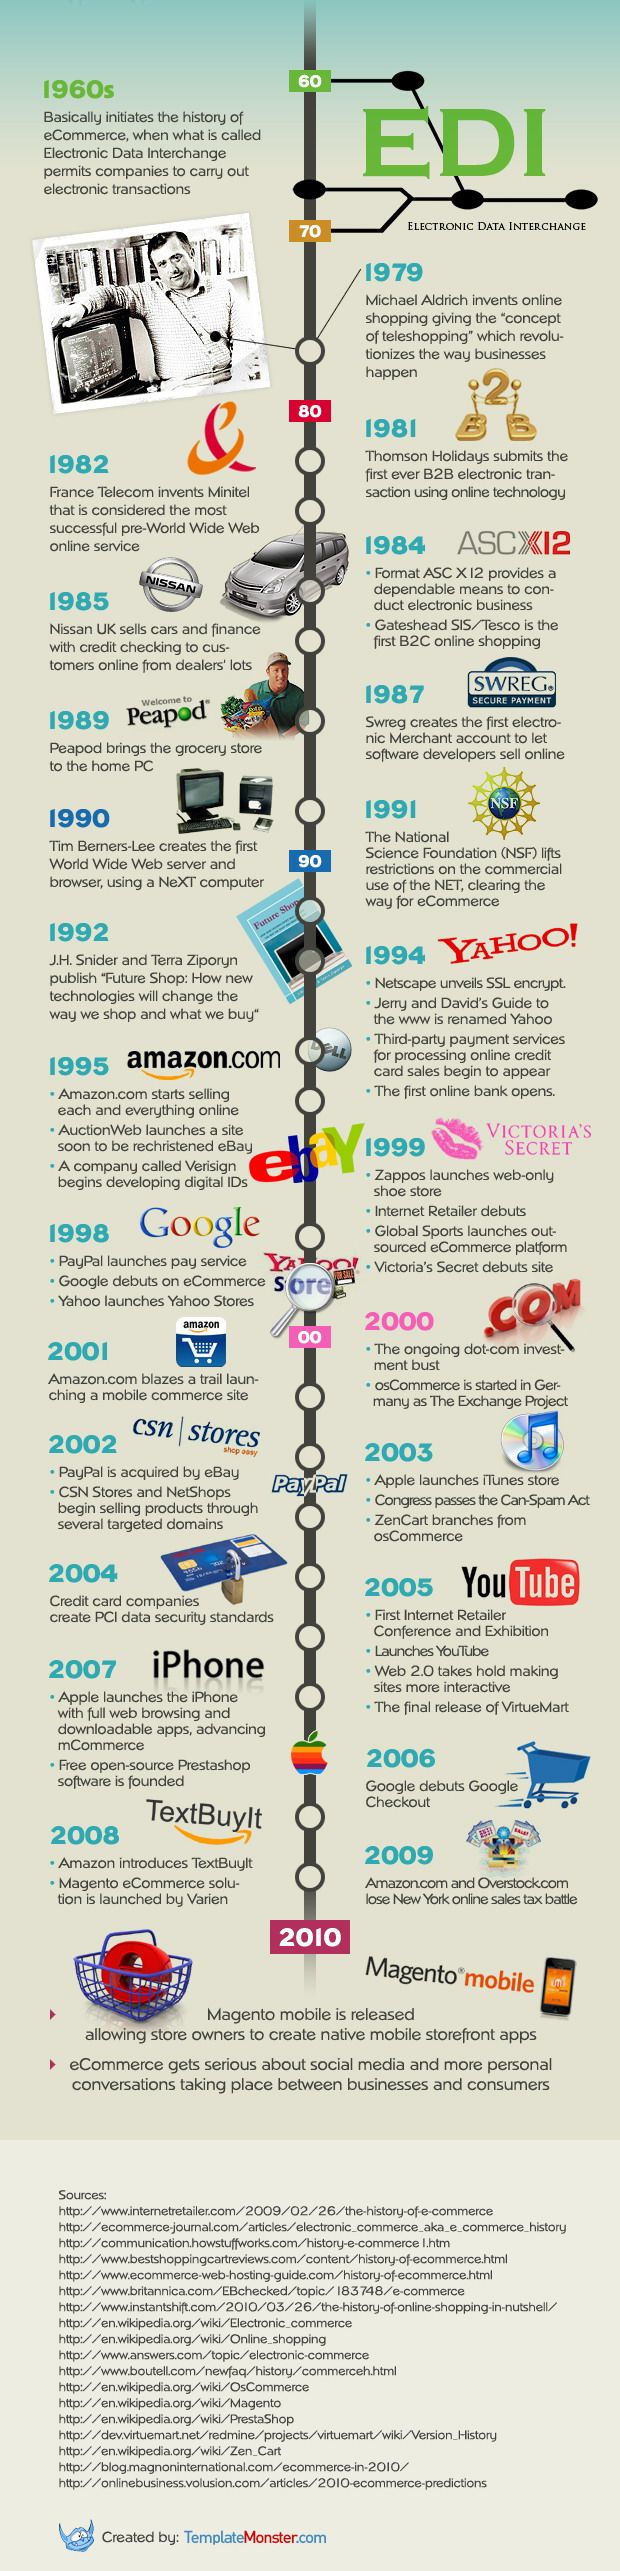 The History of e-commerce until 2010 [timeline infographic]